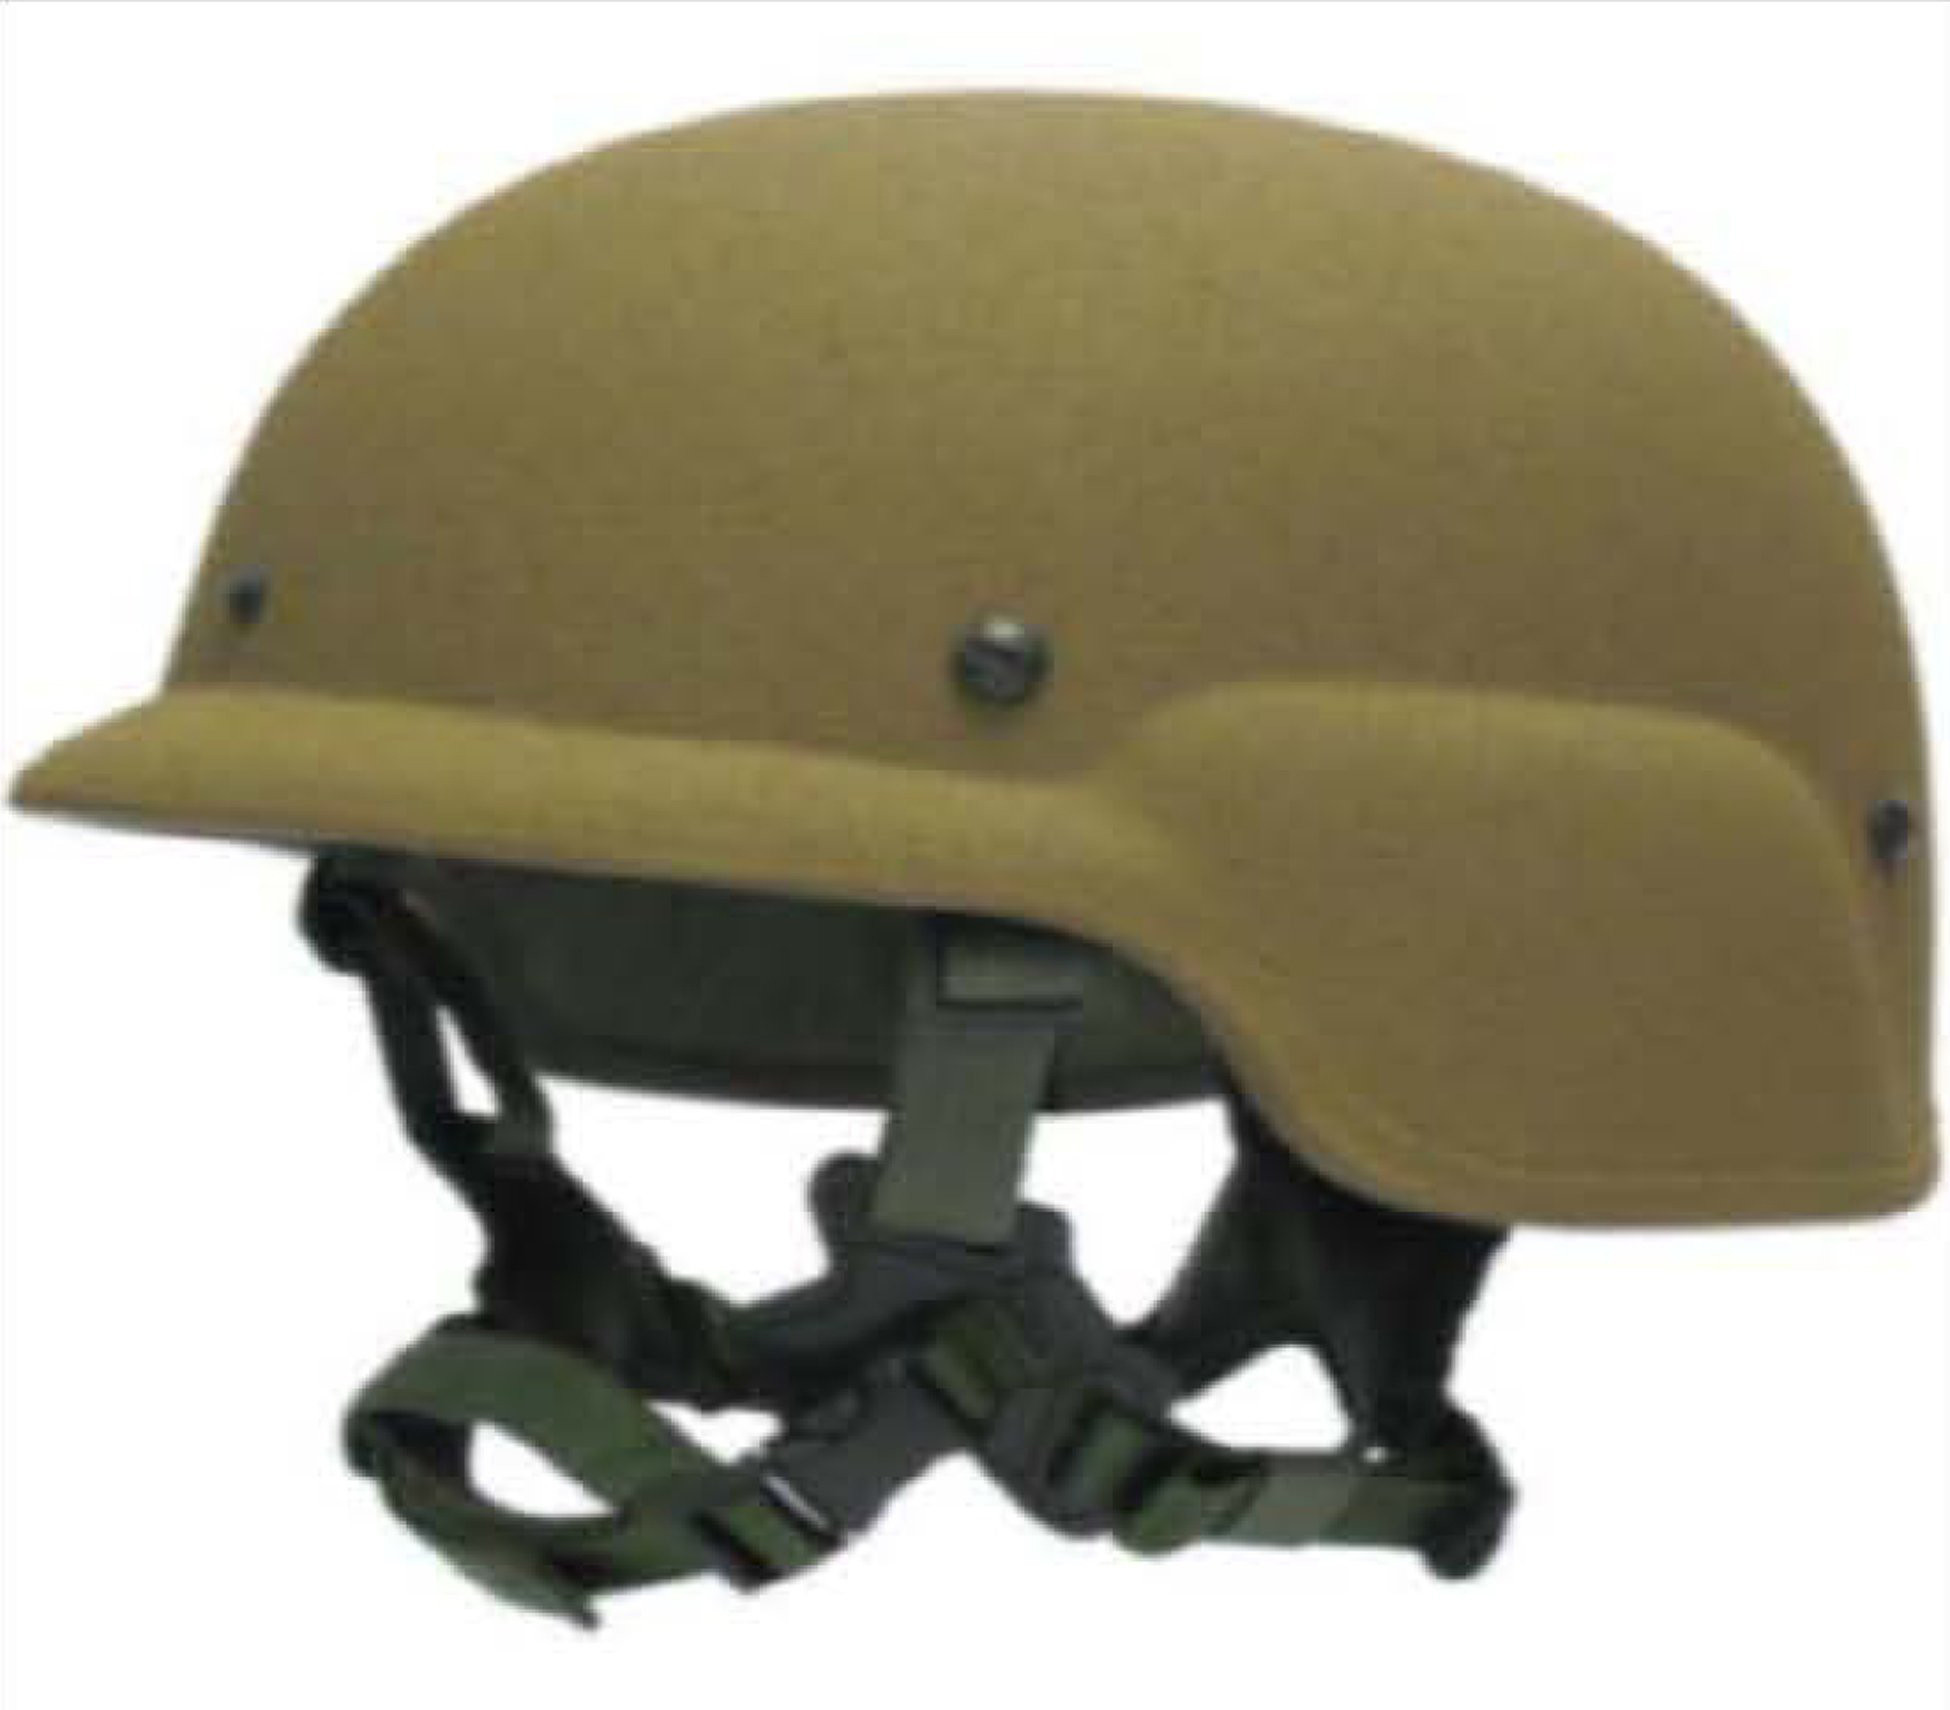 Defective military helmets made by inmates cost millions, but ...